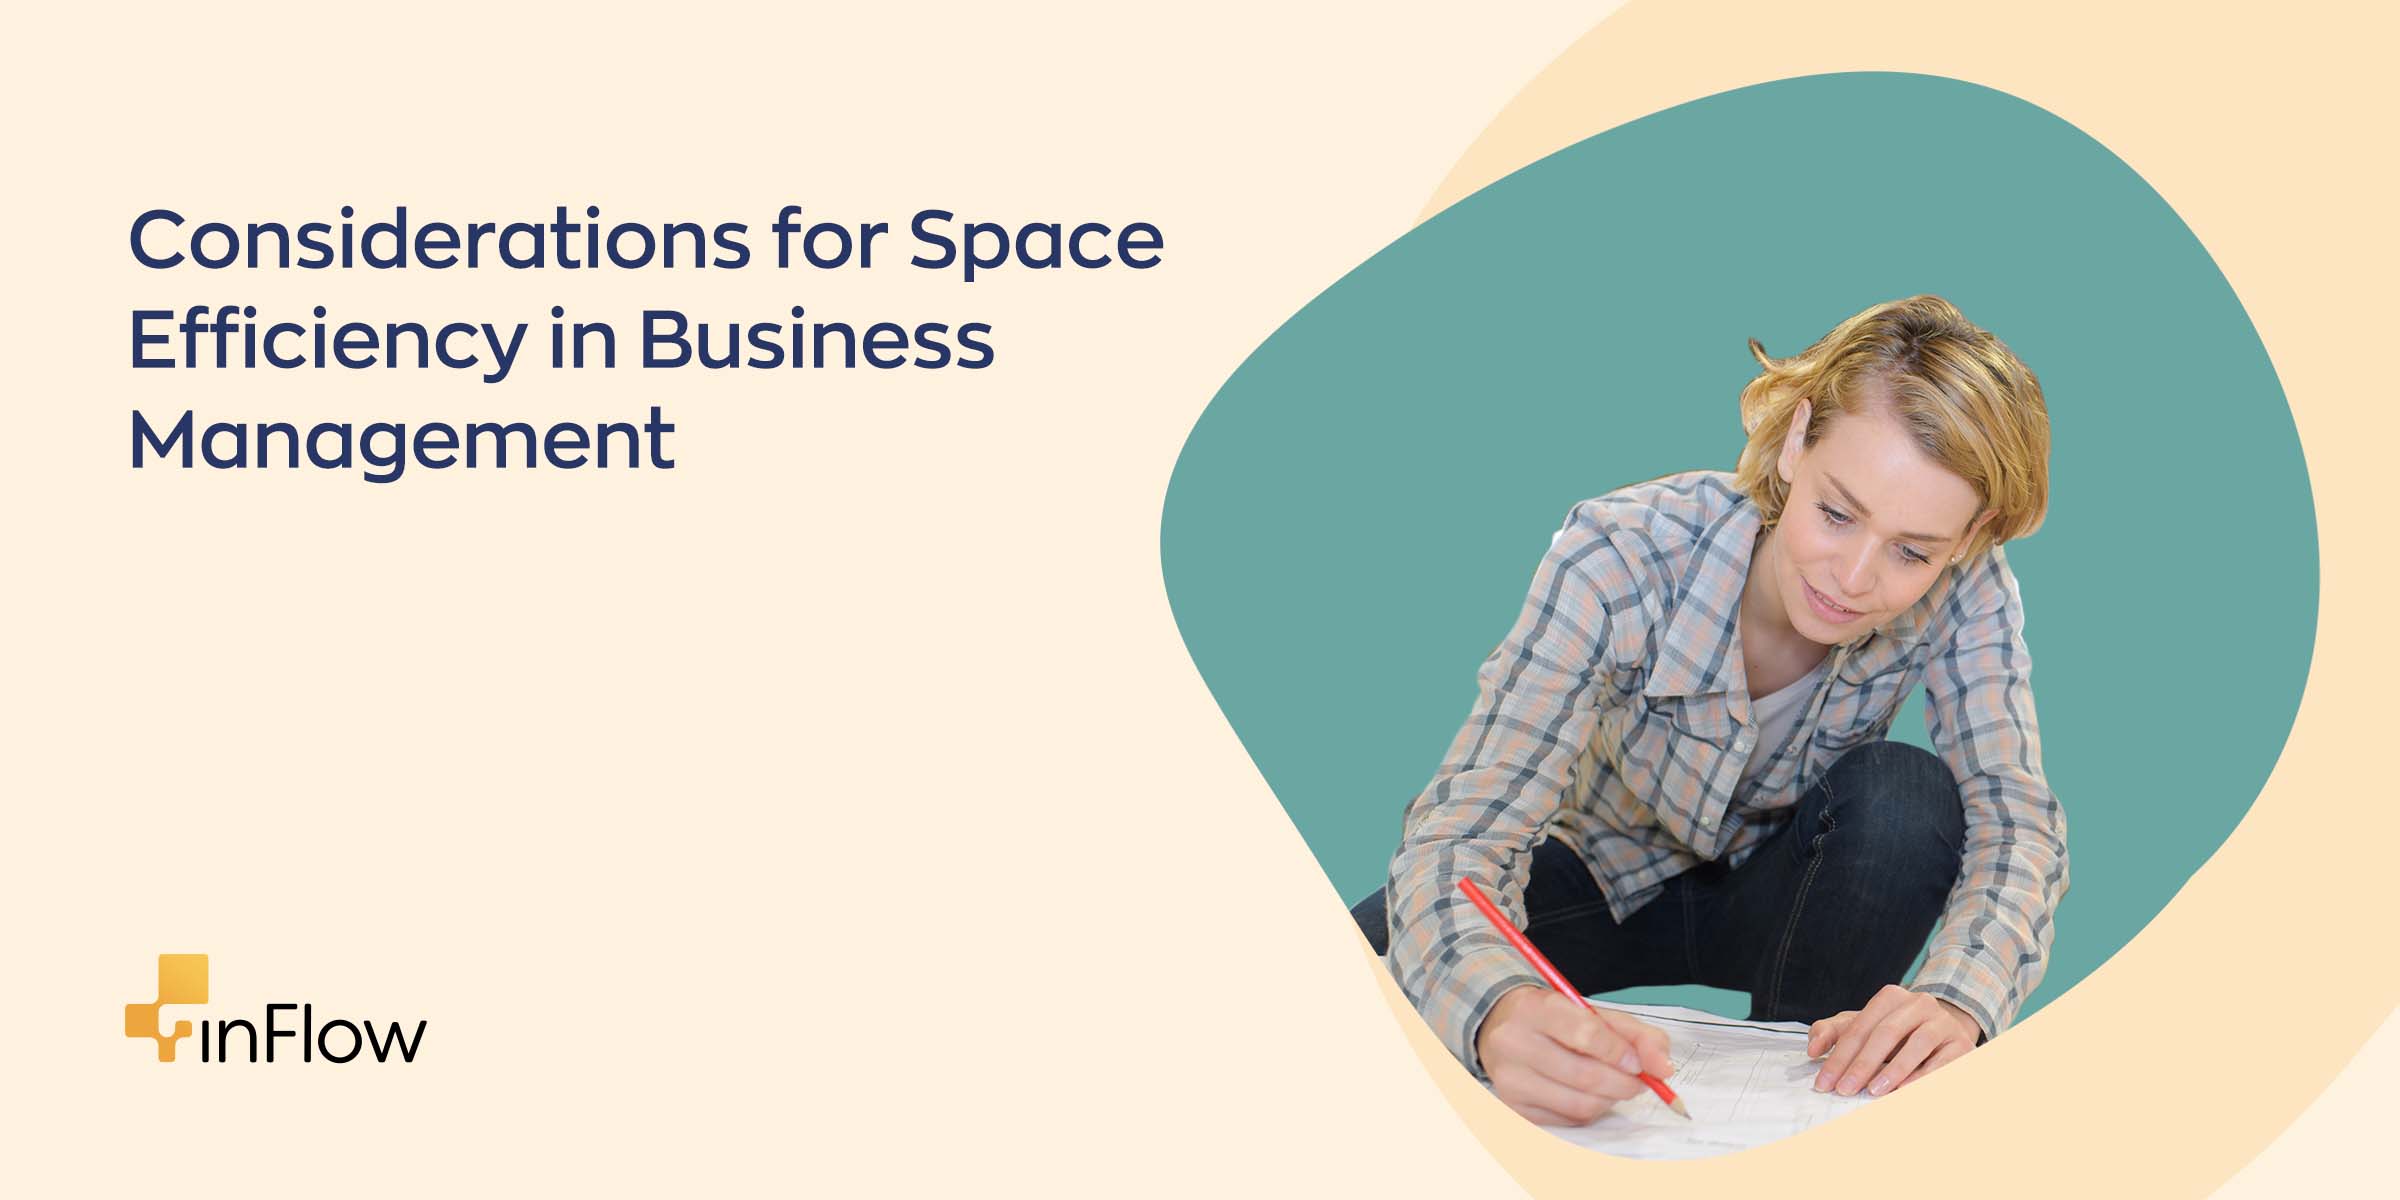 Considerations for Space Efficiency in Business Management